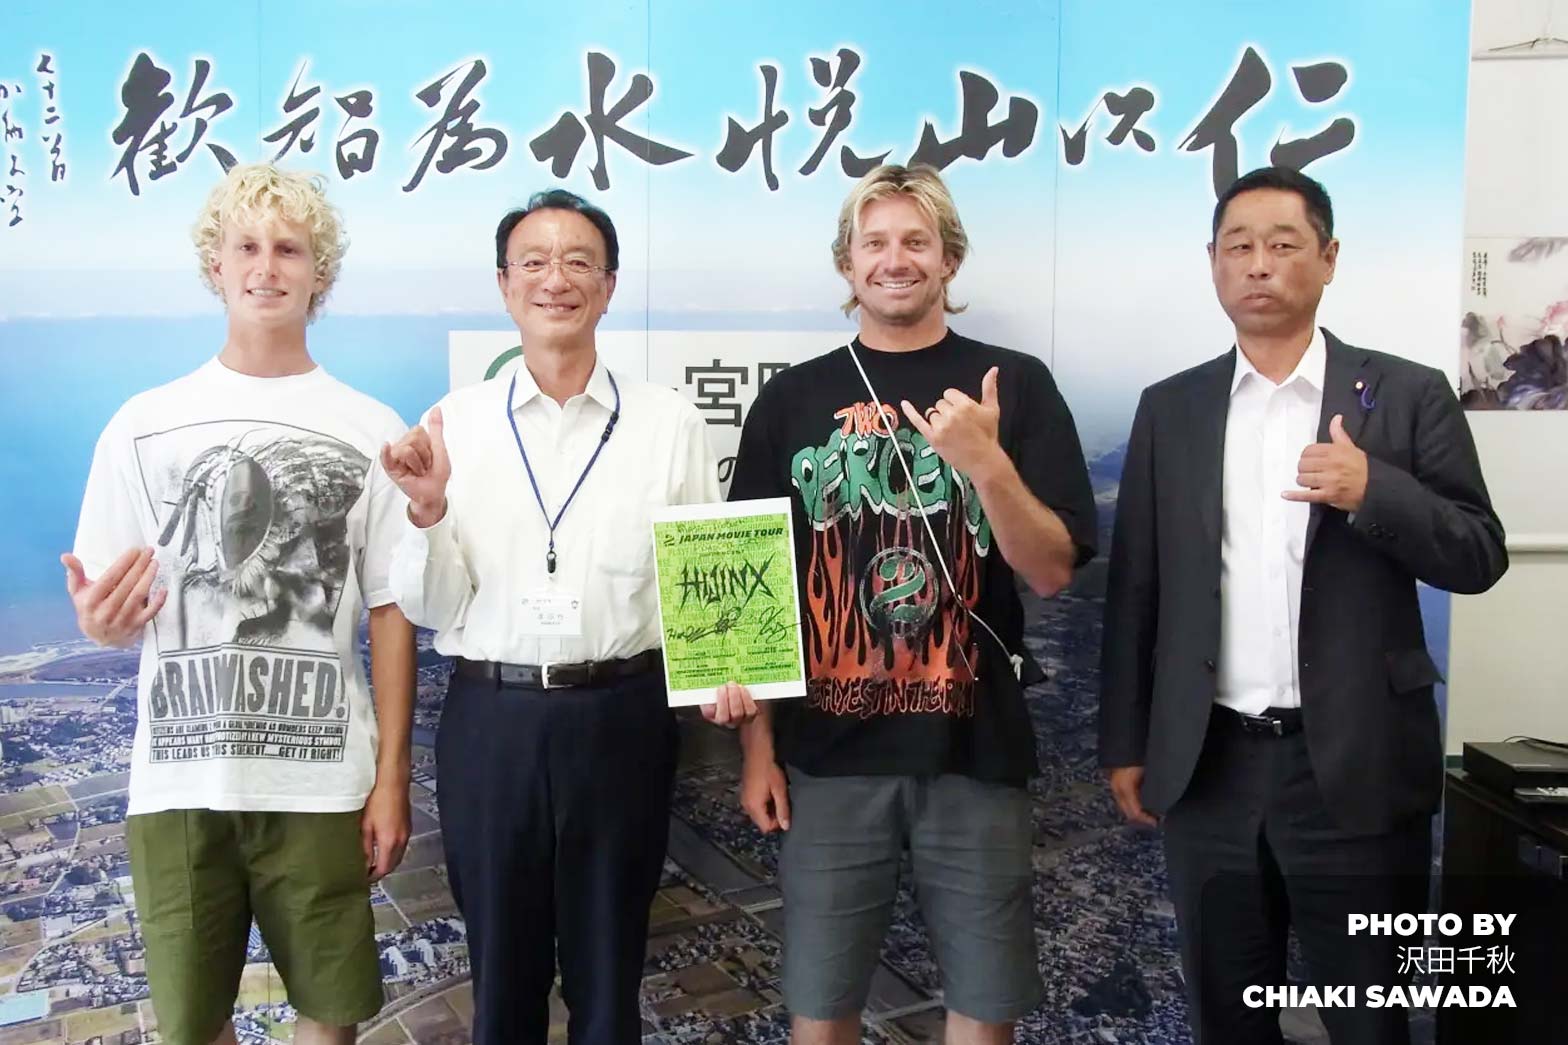 Surfing Icon Kolohe Andino Brings Ocean Conservation to Life in Ichinomiya with New Film